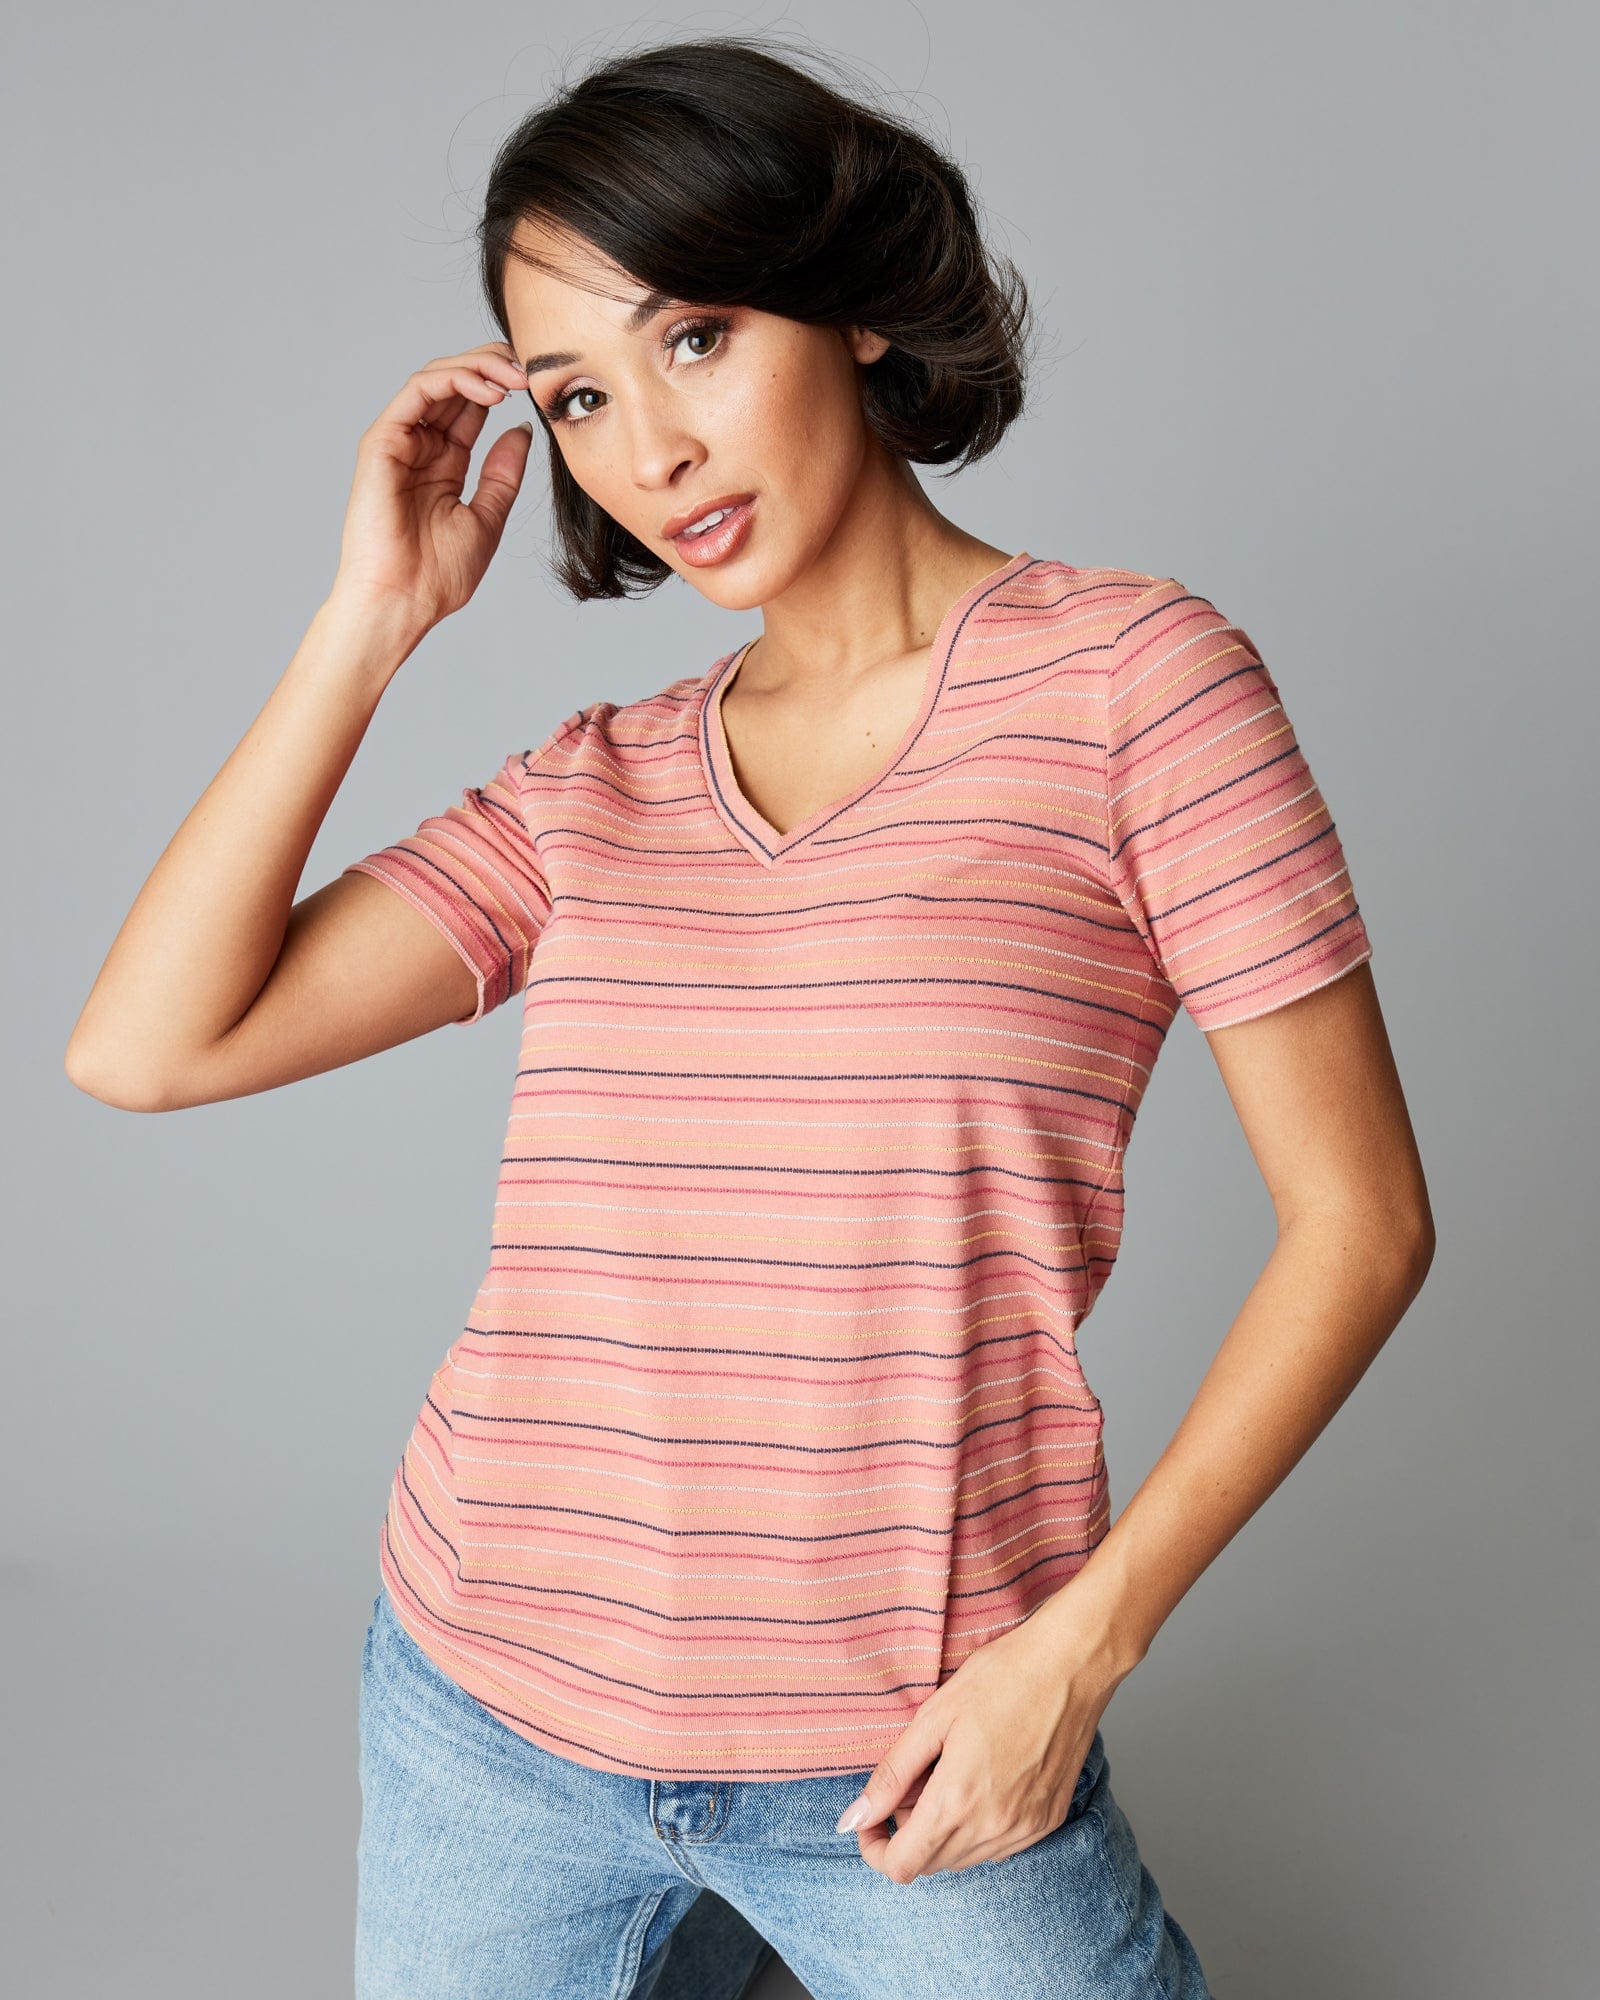 Woman in a short sleeve, pink, striped tee.